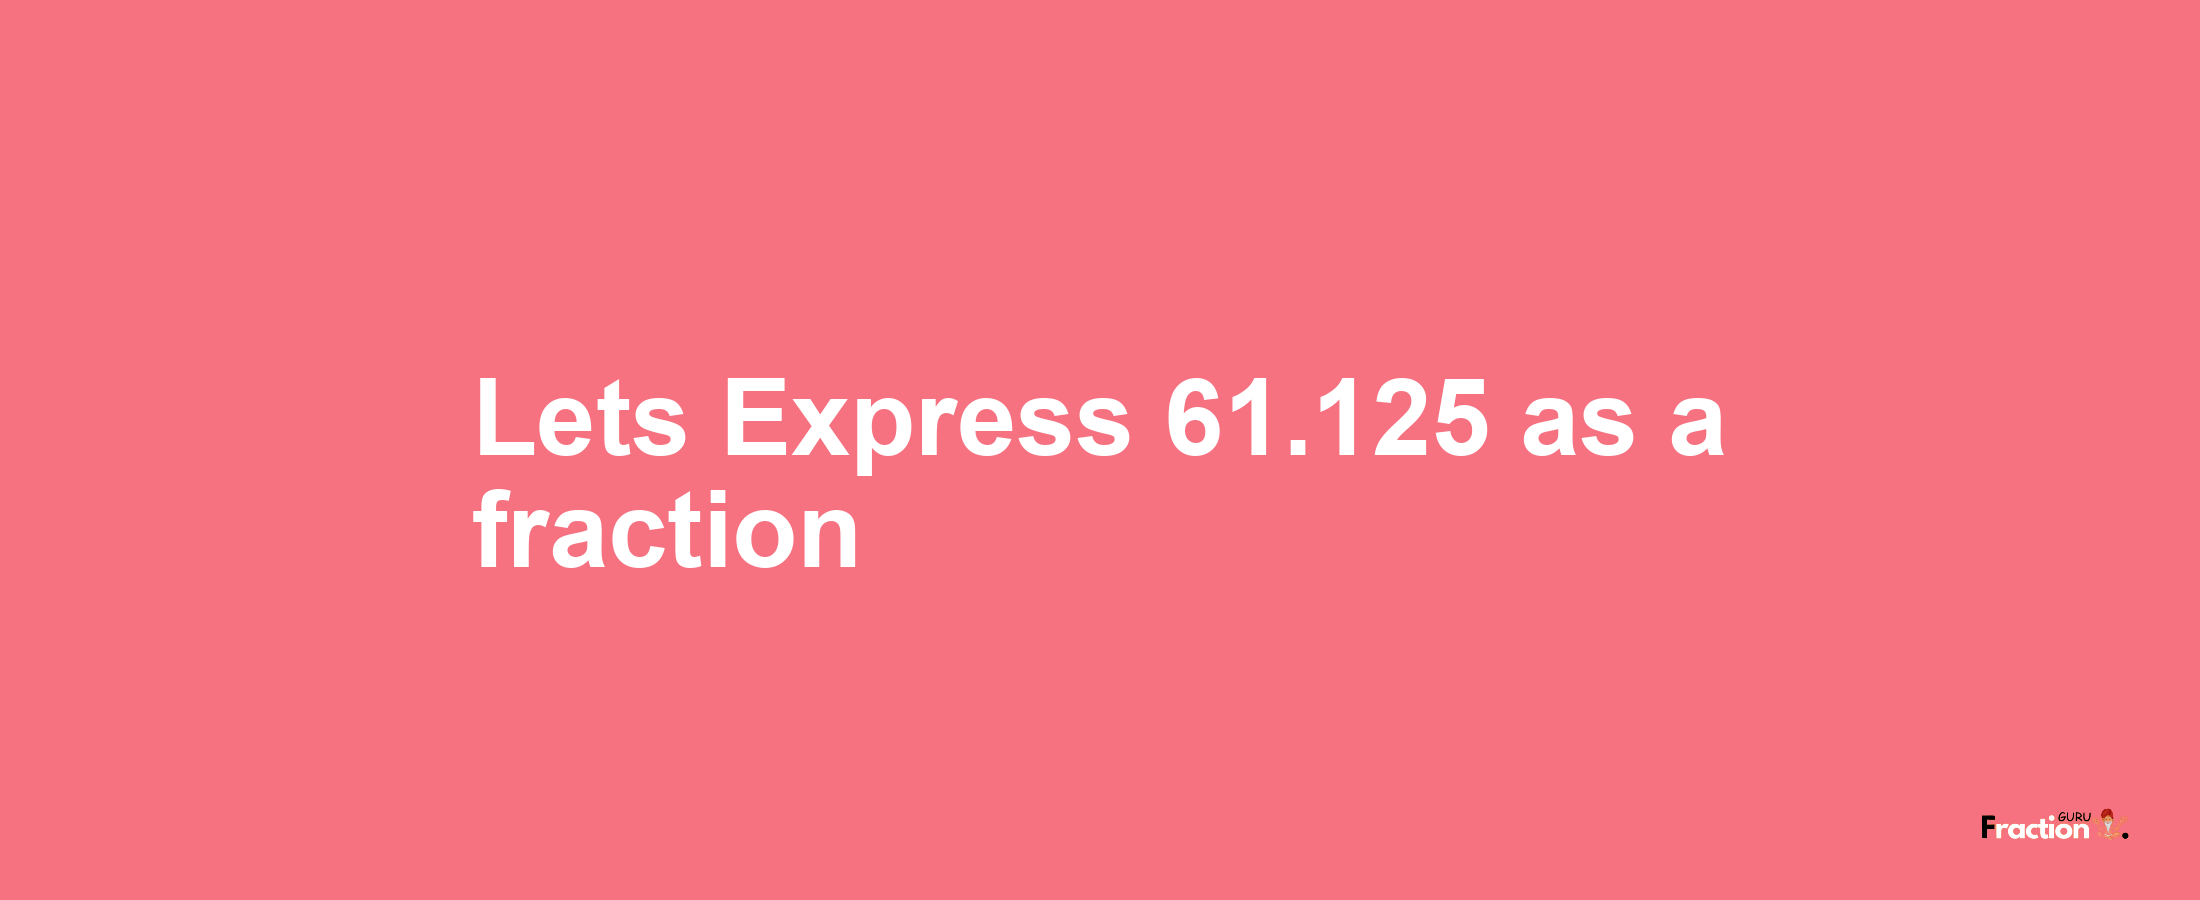 Lets Express 61.125 as afraction